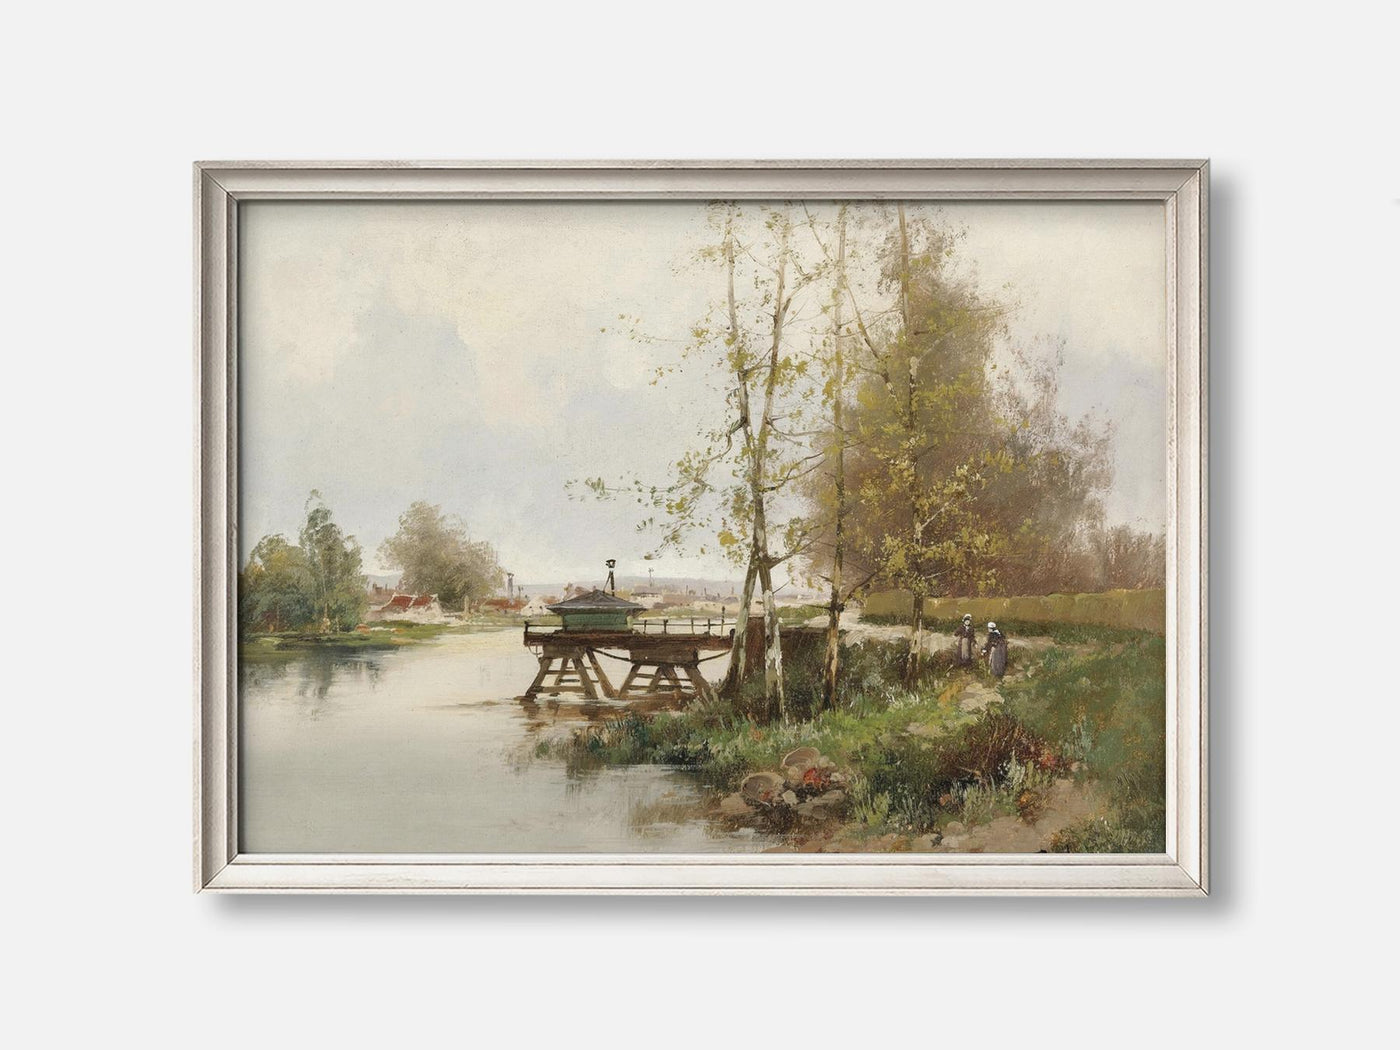 The Pond at the edge of the village Art Print mockup - A_p15-V1-PC_F+O-SS_1-PS_5x7-C_def variant